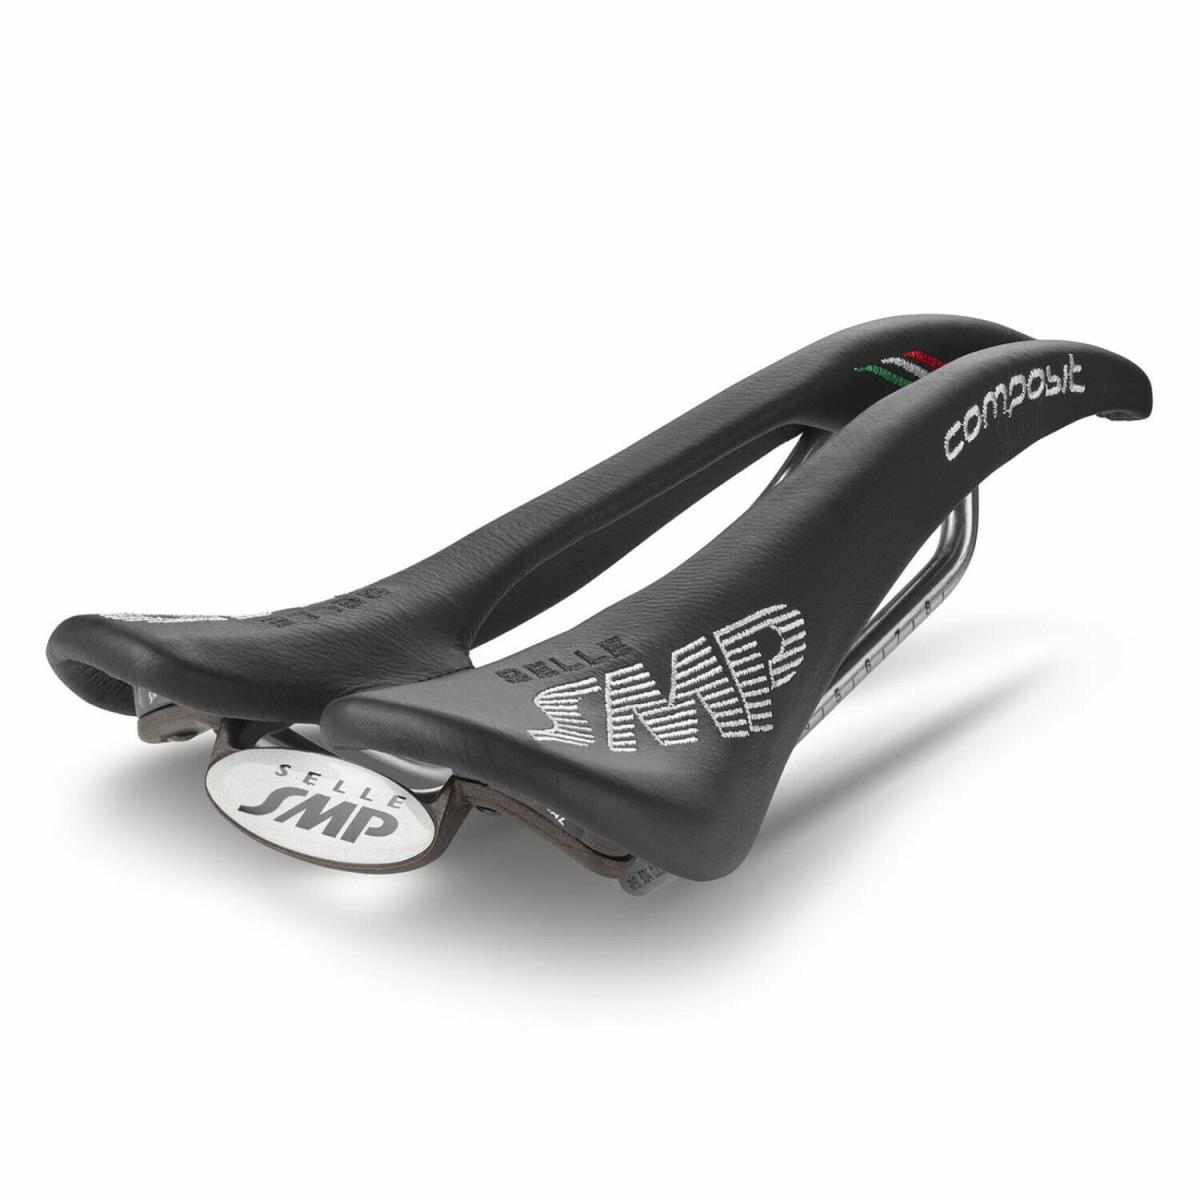 Selle Smp Well S Gel Road Mtb Bicycle Saddle : Black Made In Italy